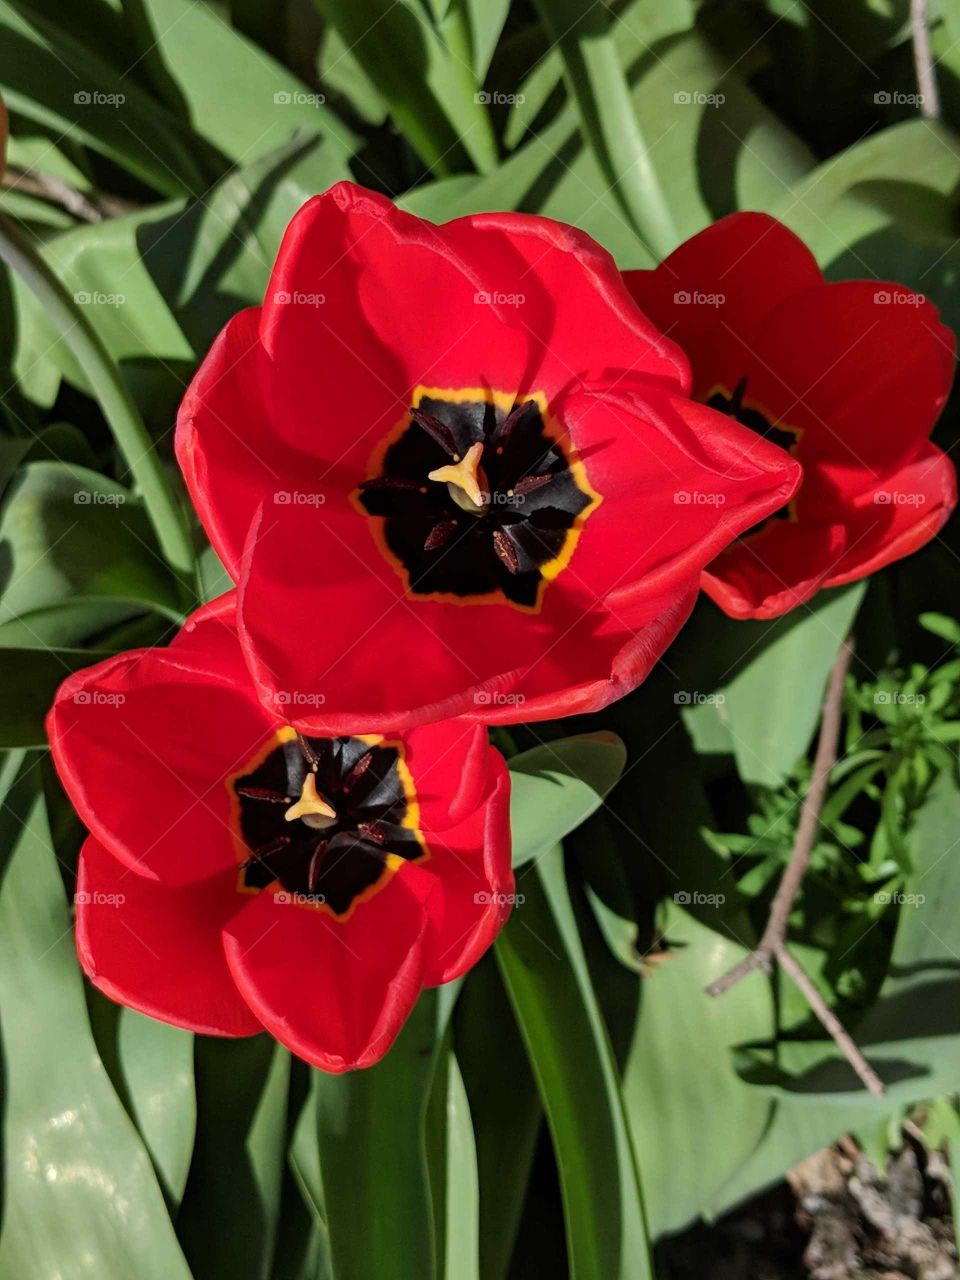 open red tulips with black center